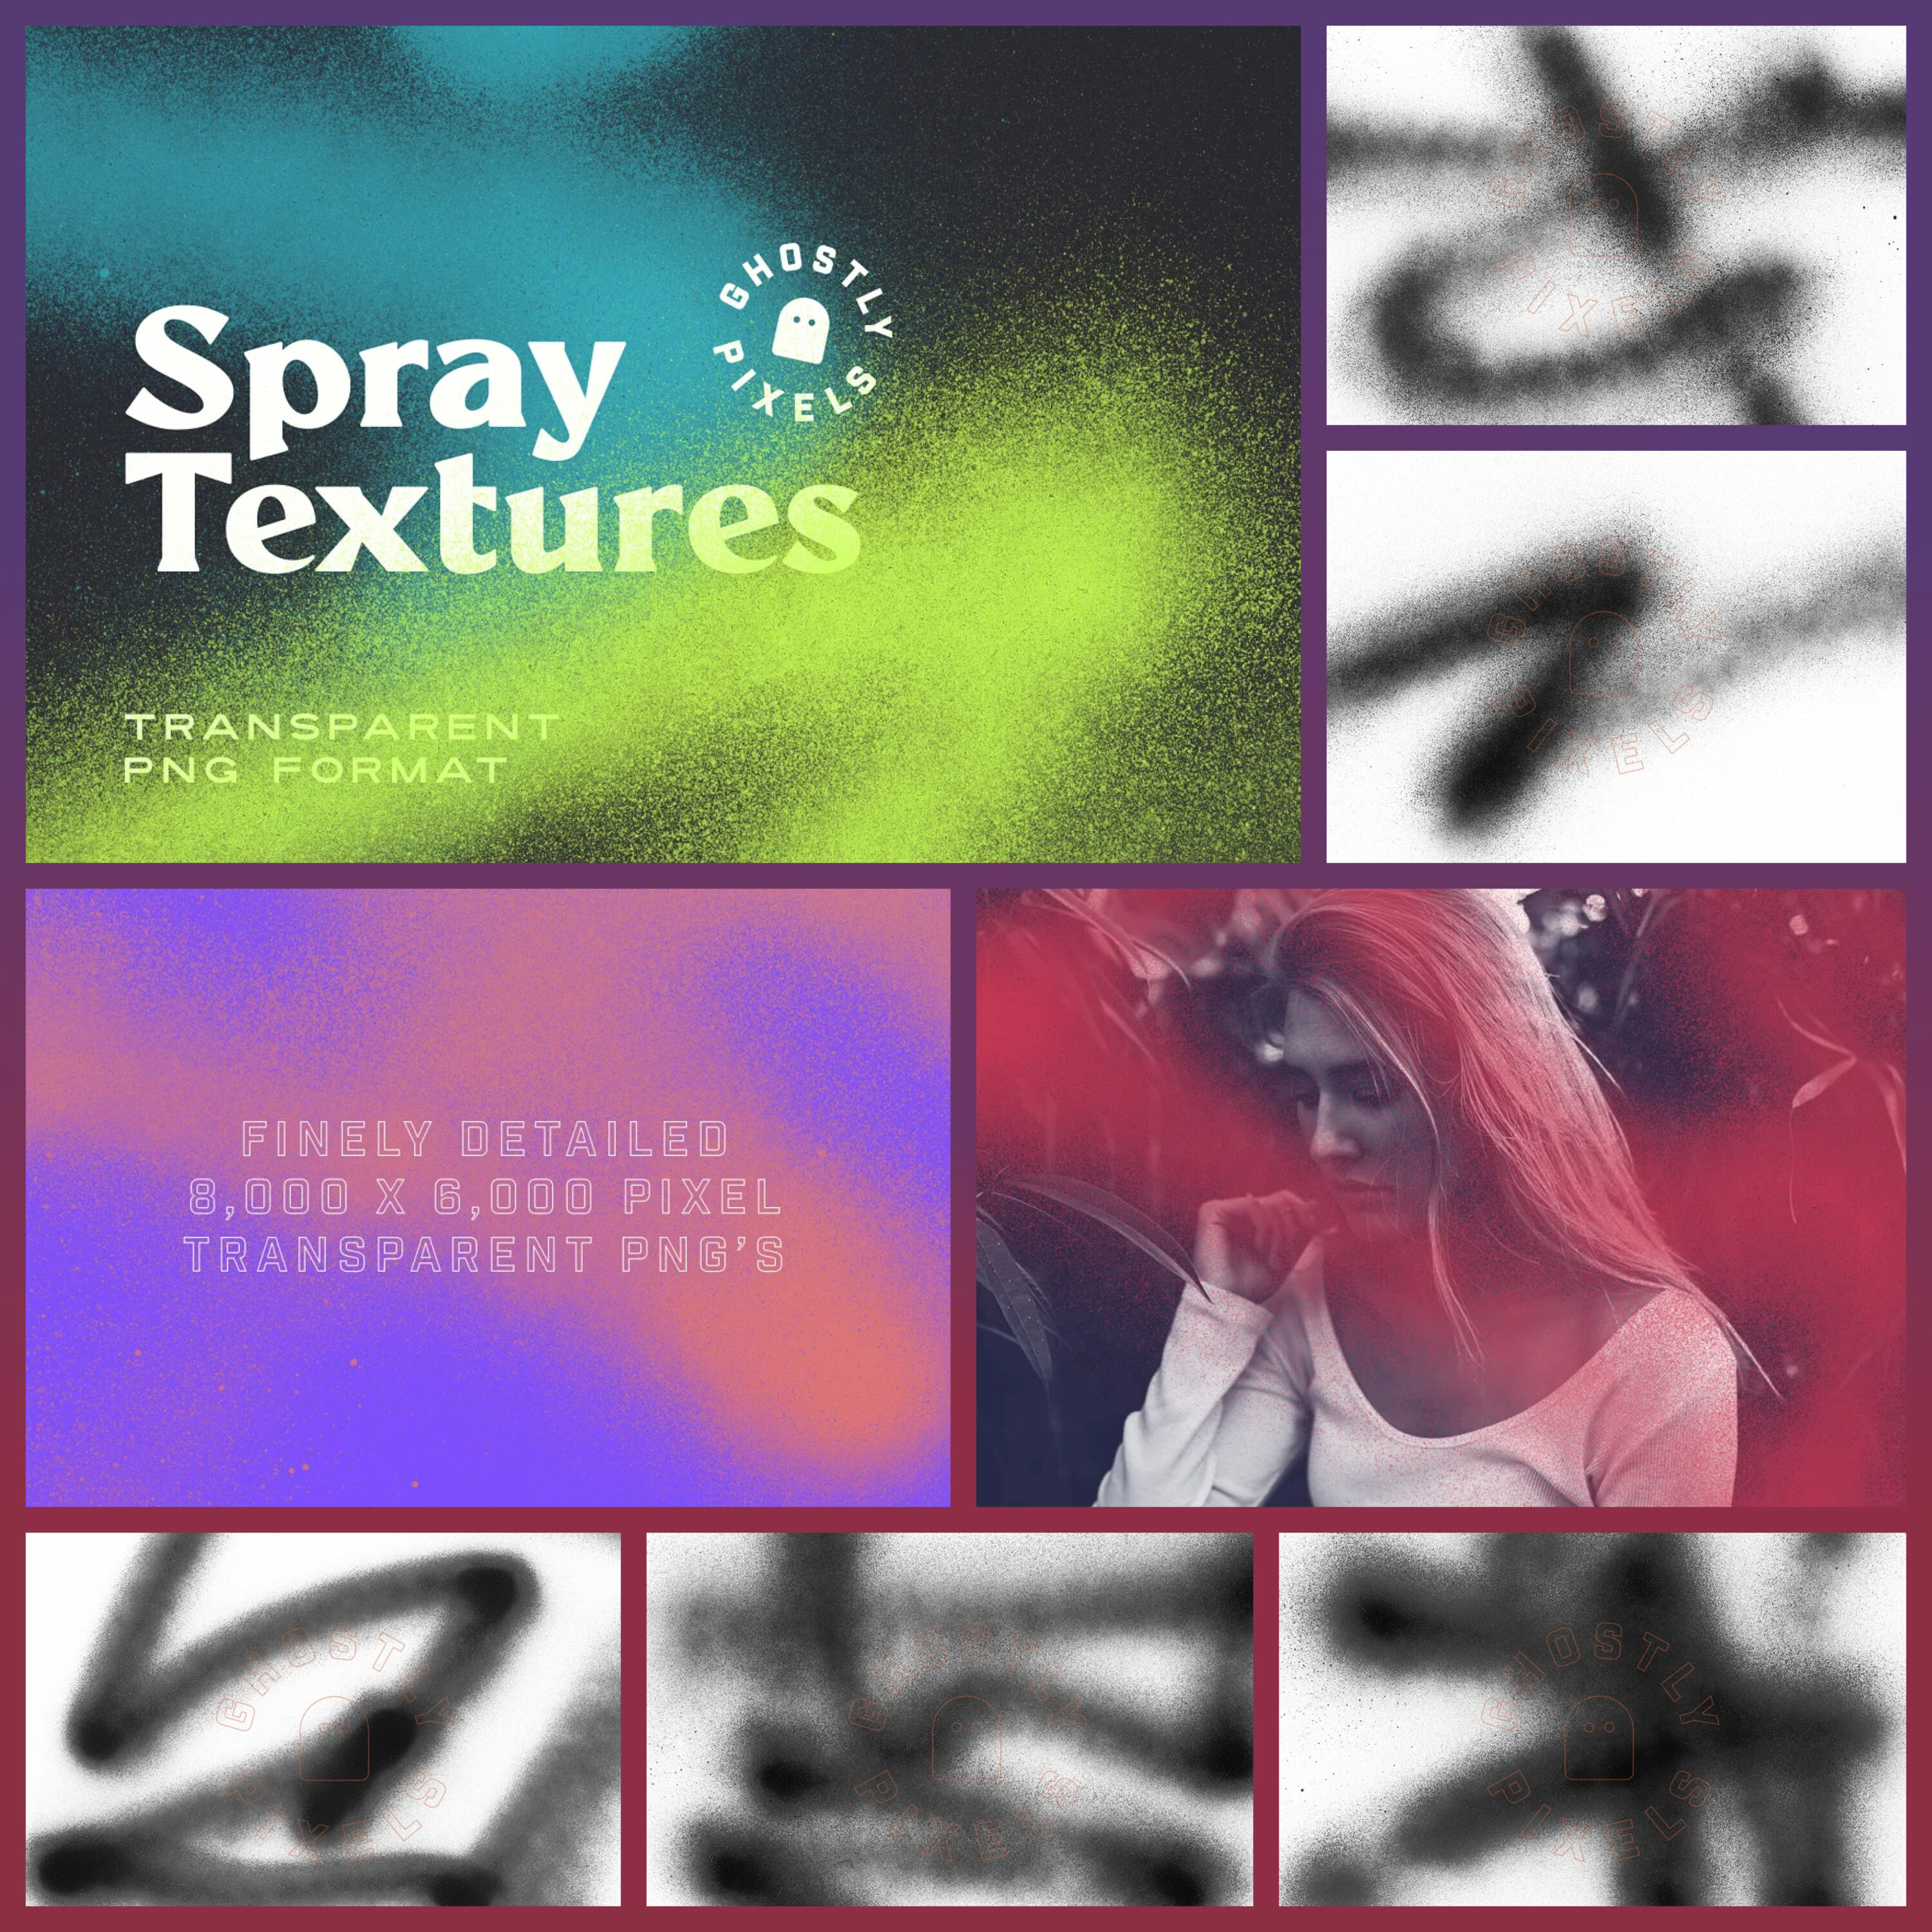 Spray Paint Textures cover image.